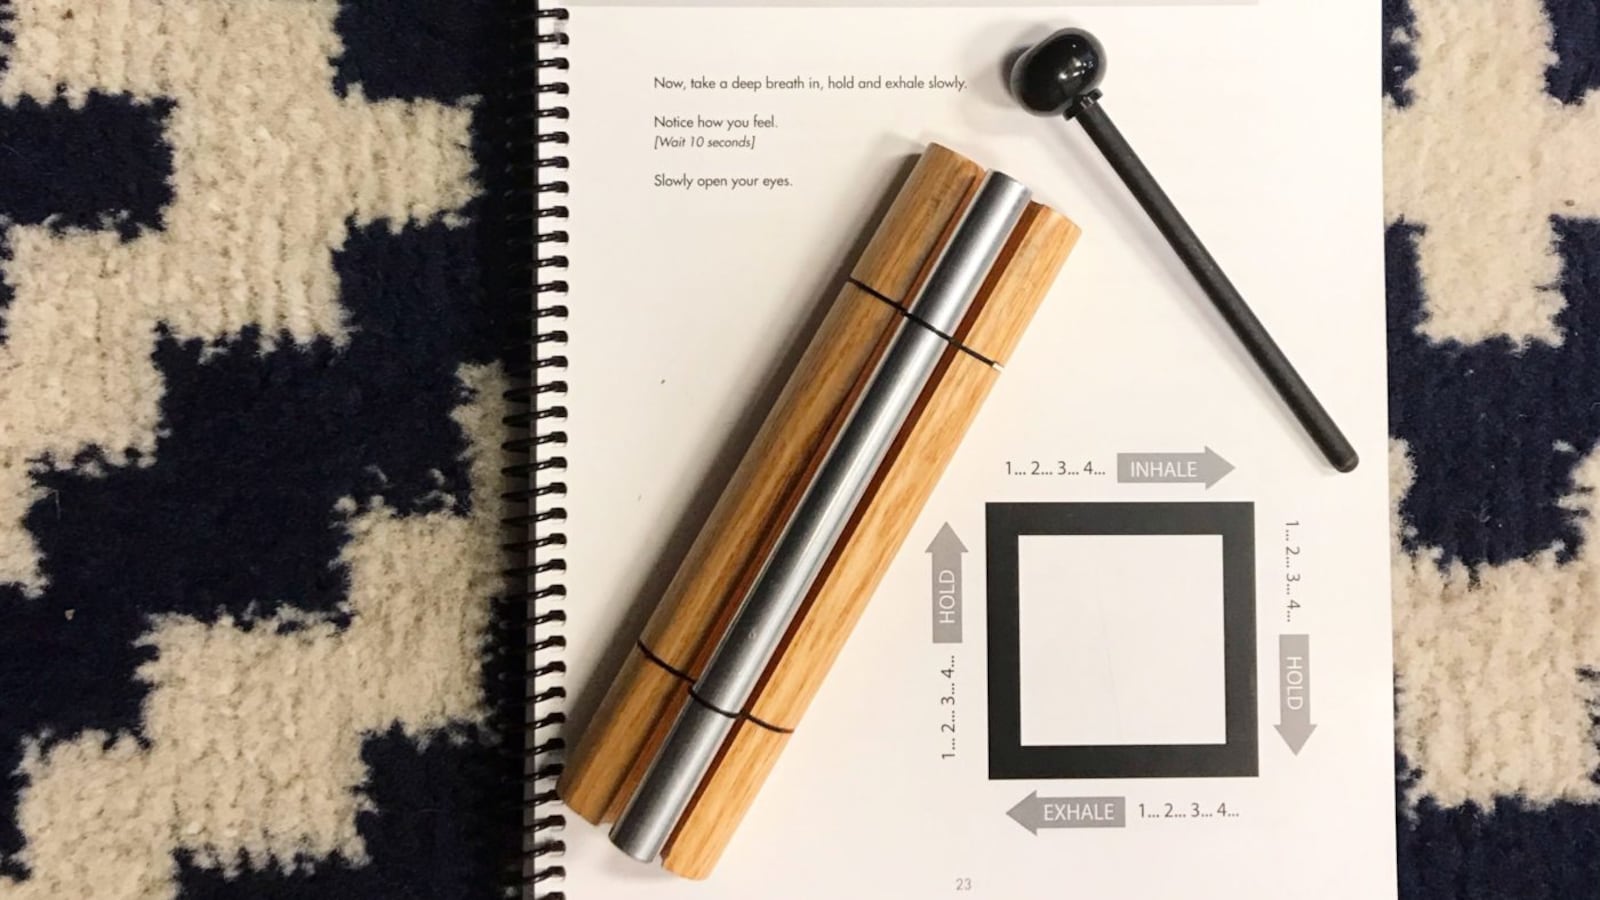 Calm Classroom accessories including wood chimes and a curriculum guide